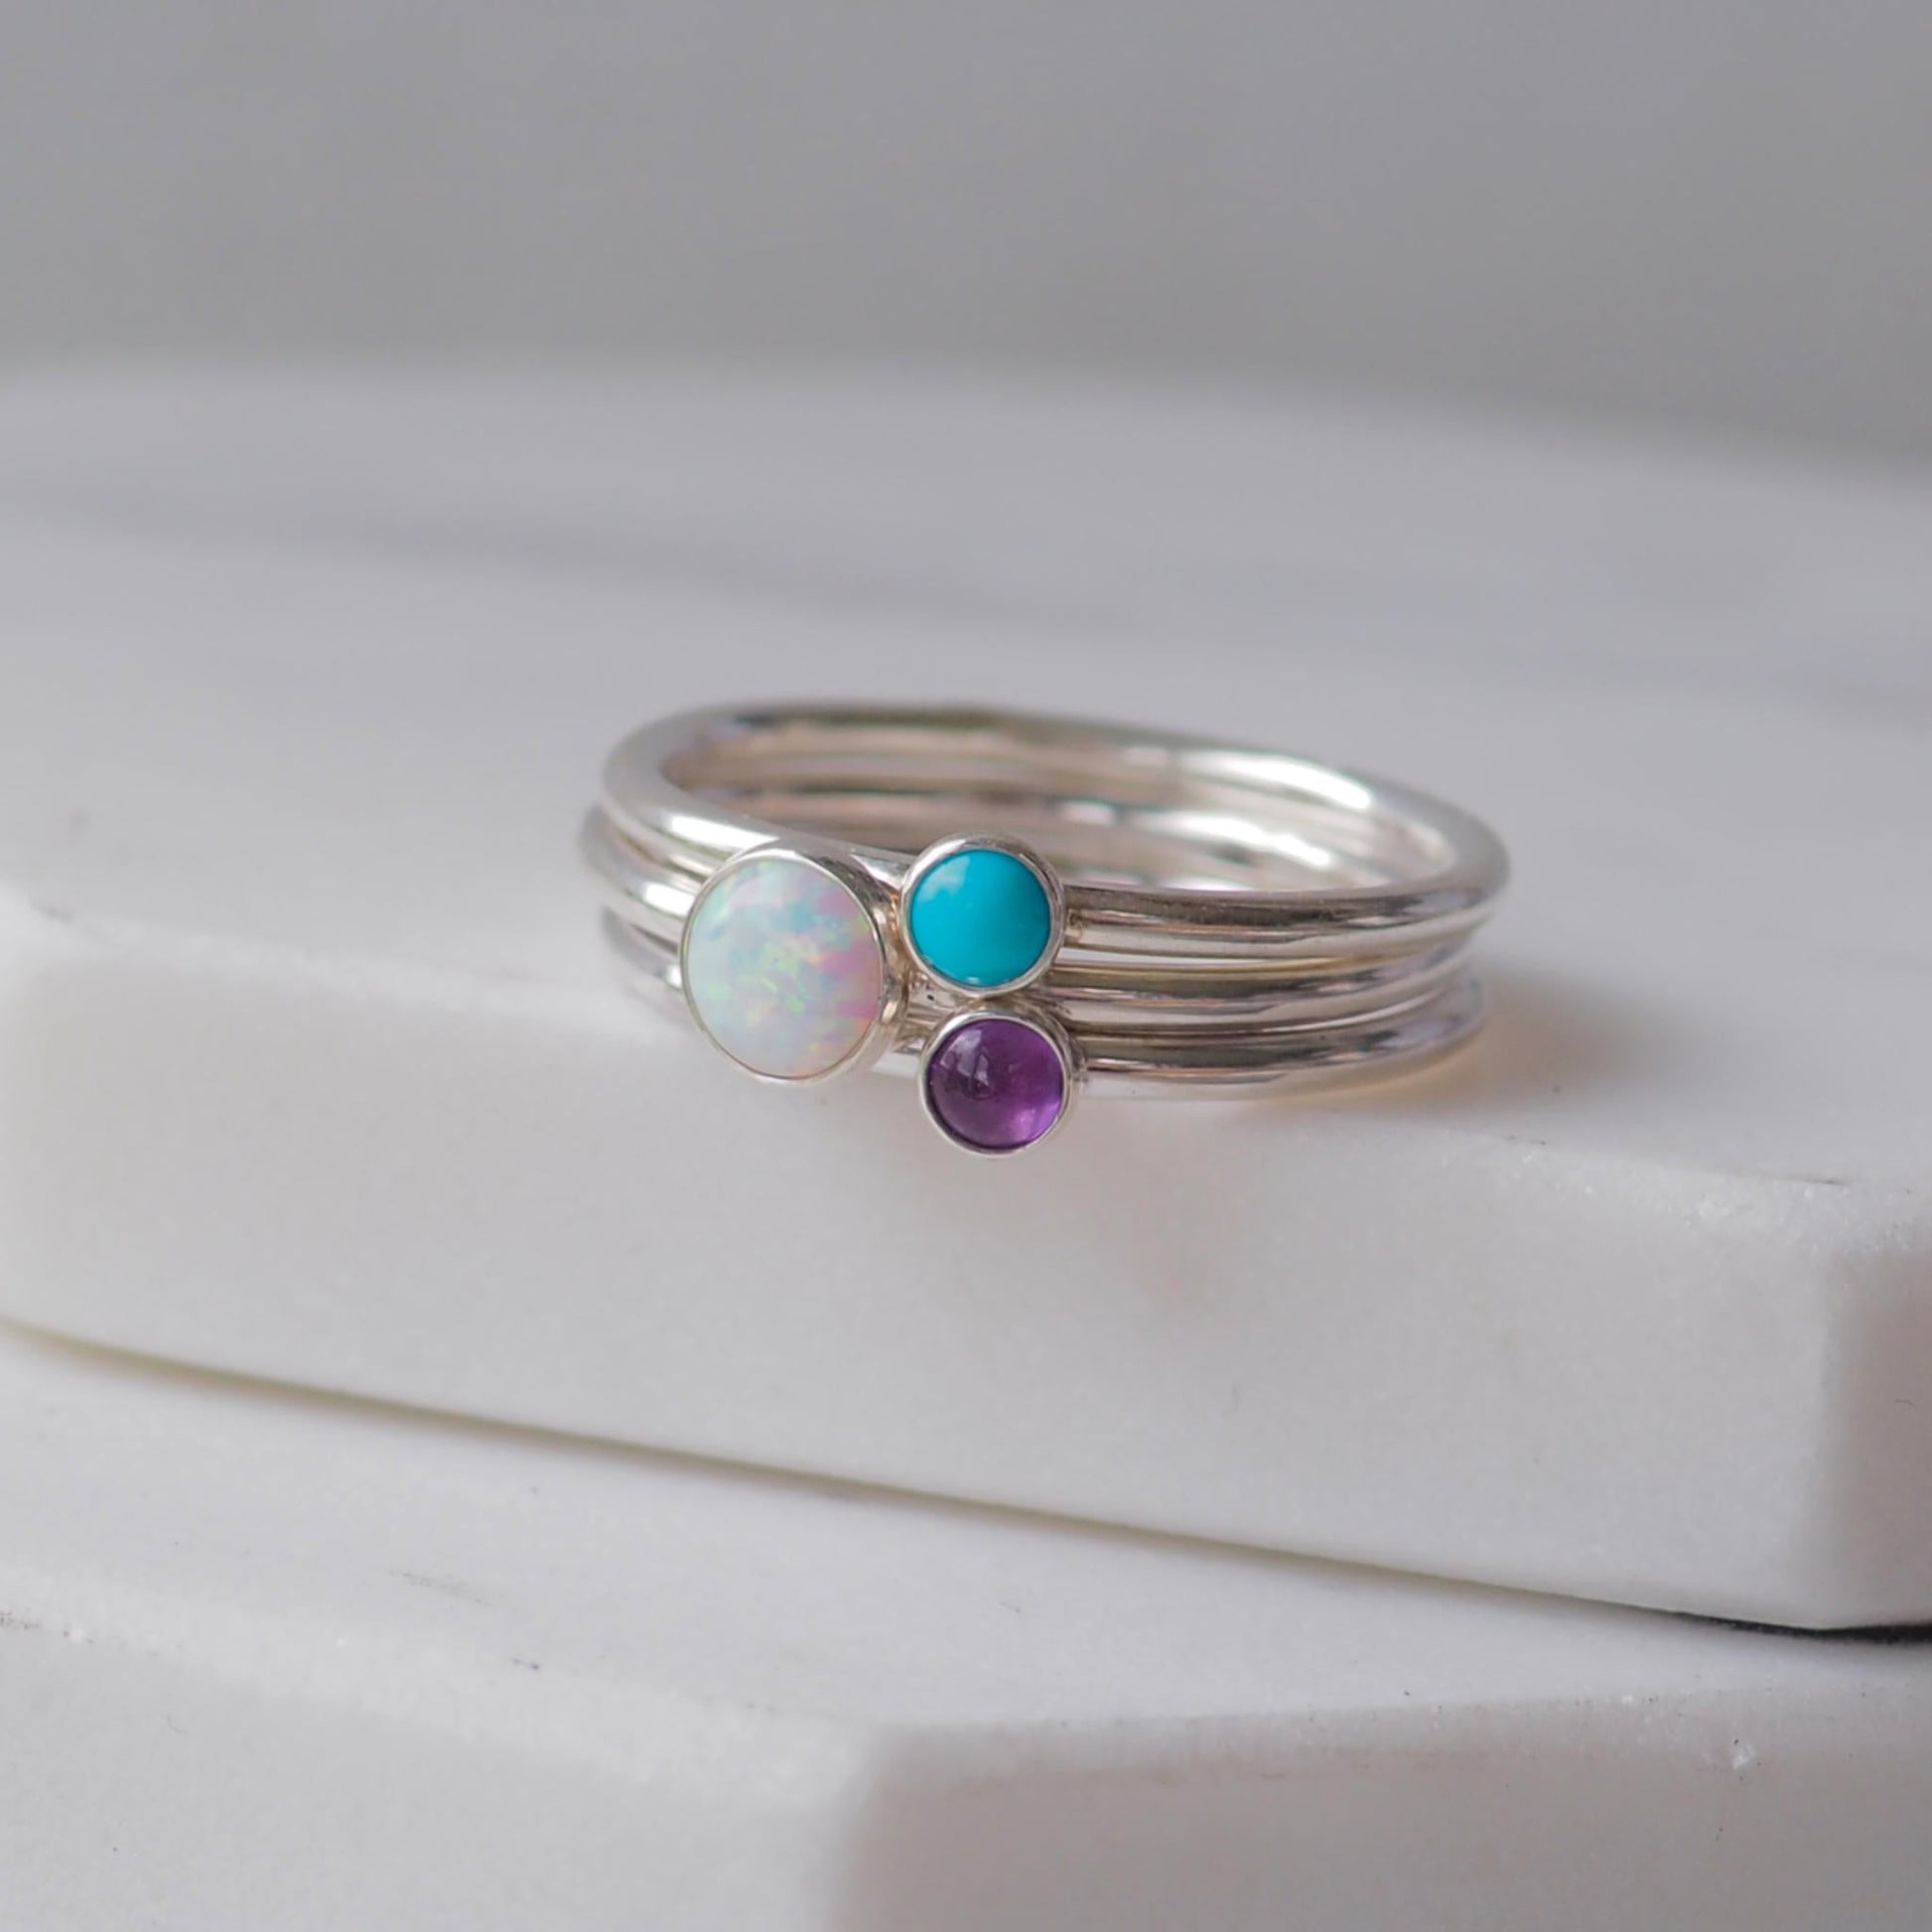 Three silver rings with lal Opal Turquoise and Amethyst gemstones. Birthstones for February, December and October. Handmade to your ring size by maram jewellery in Scotland , UK